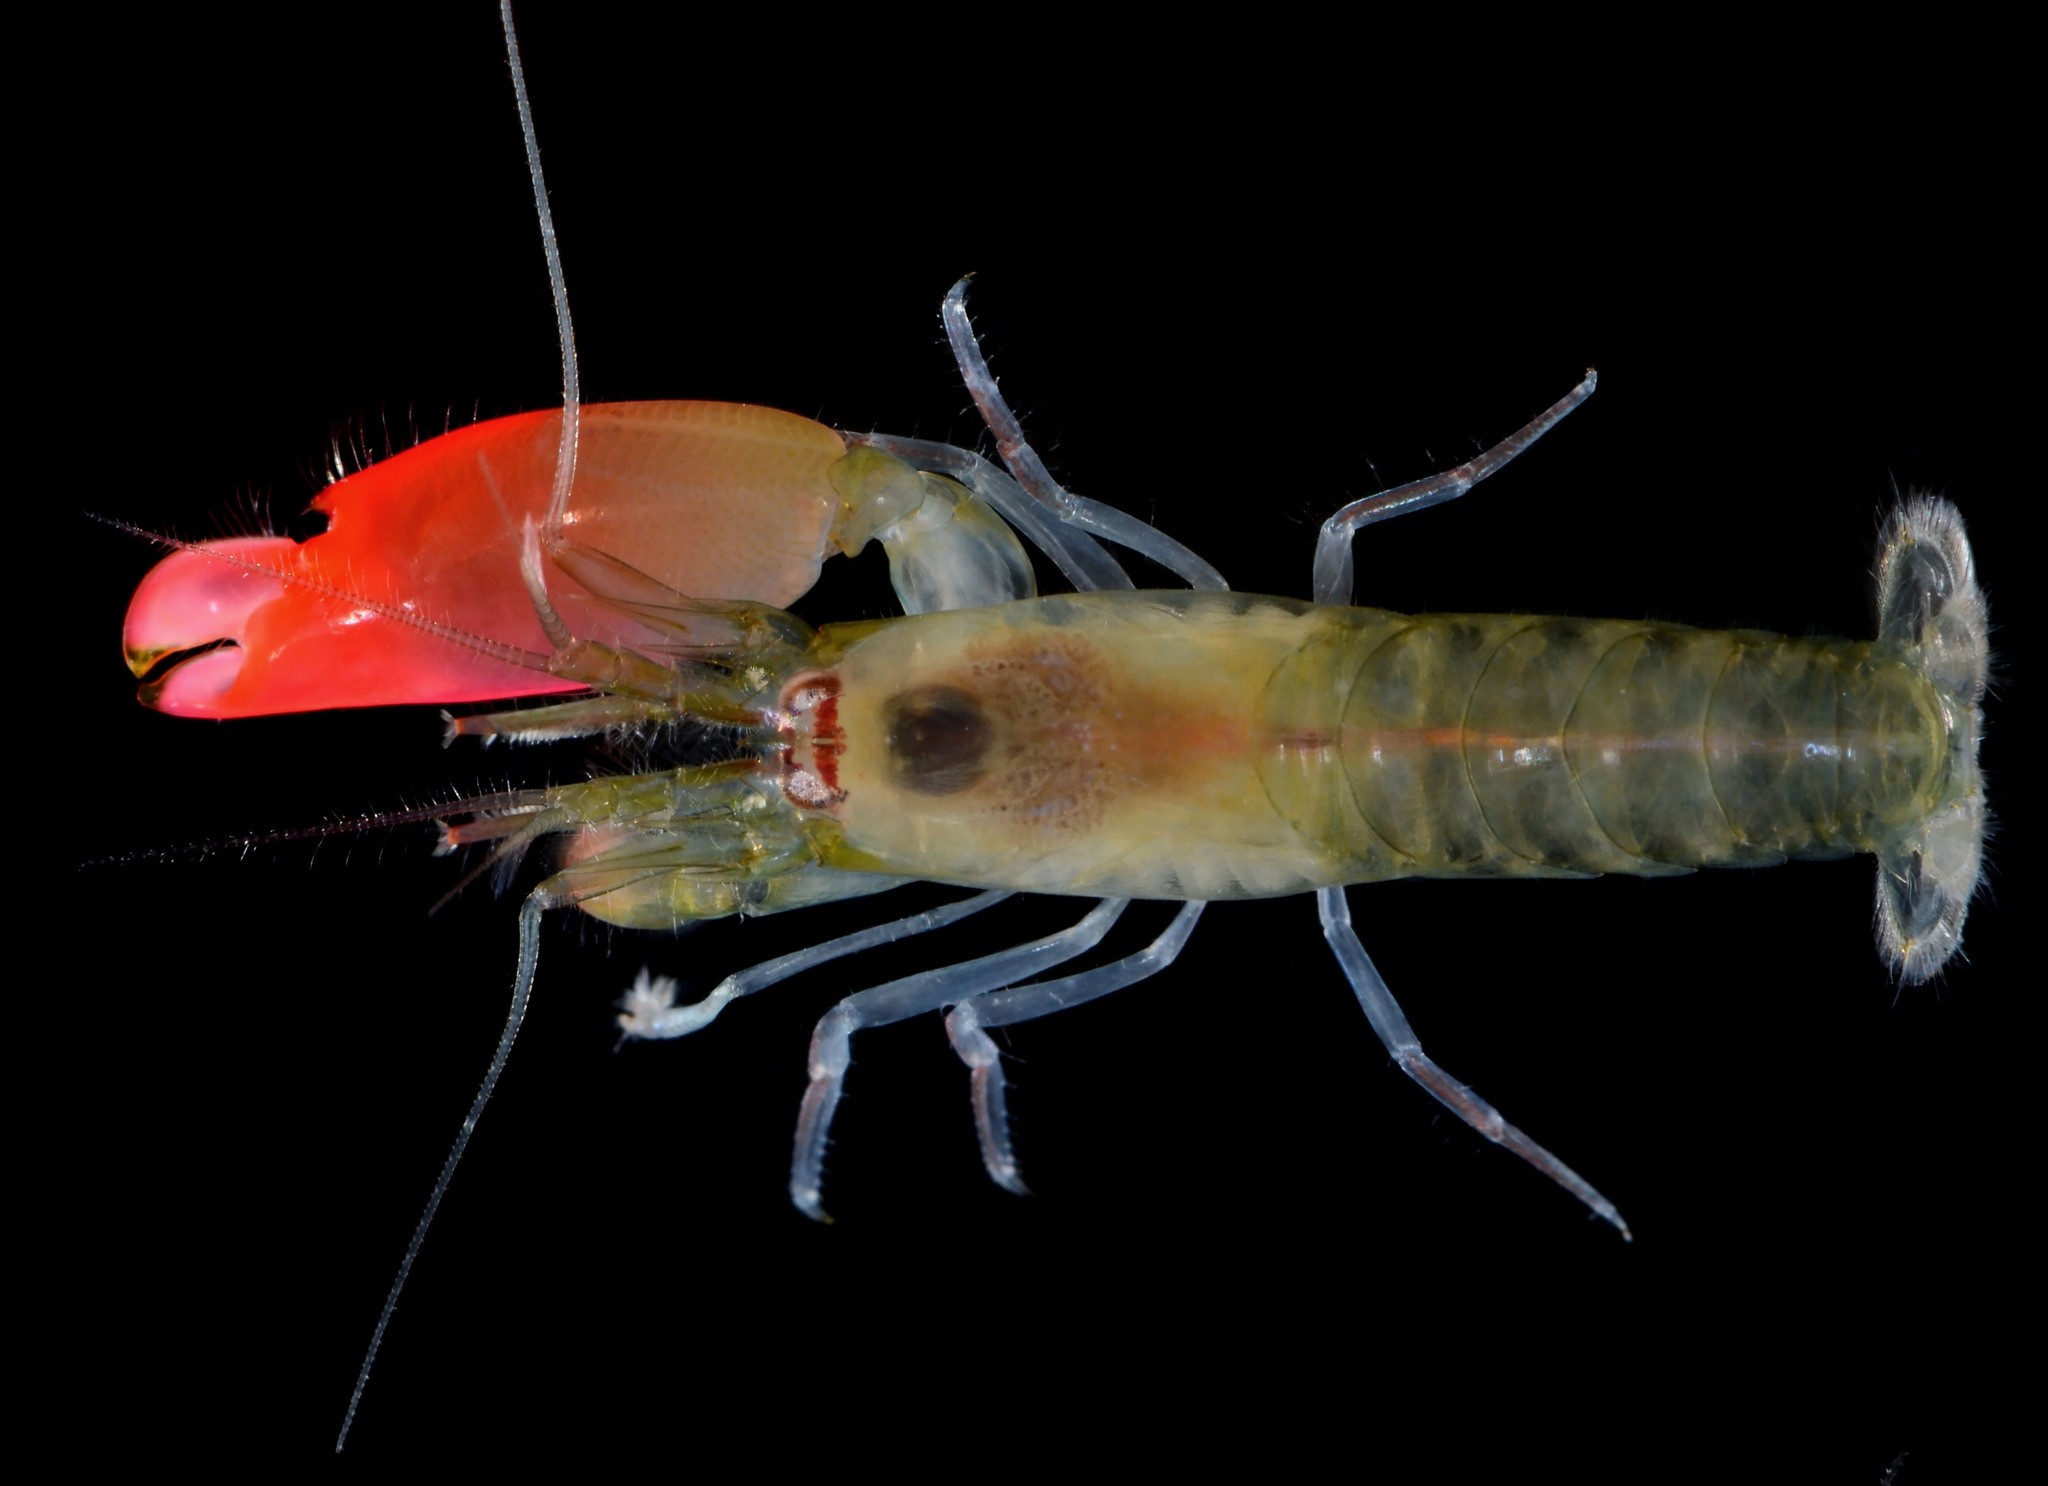 This photograph received from the Federal University of Goias on April 12, 2017, shows the newly-discovered bright pink-clawed pistol shrimp which has been named as 'Synalpheus pinkfloydi' in the scientific description of the species. (AFP Photo)